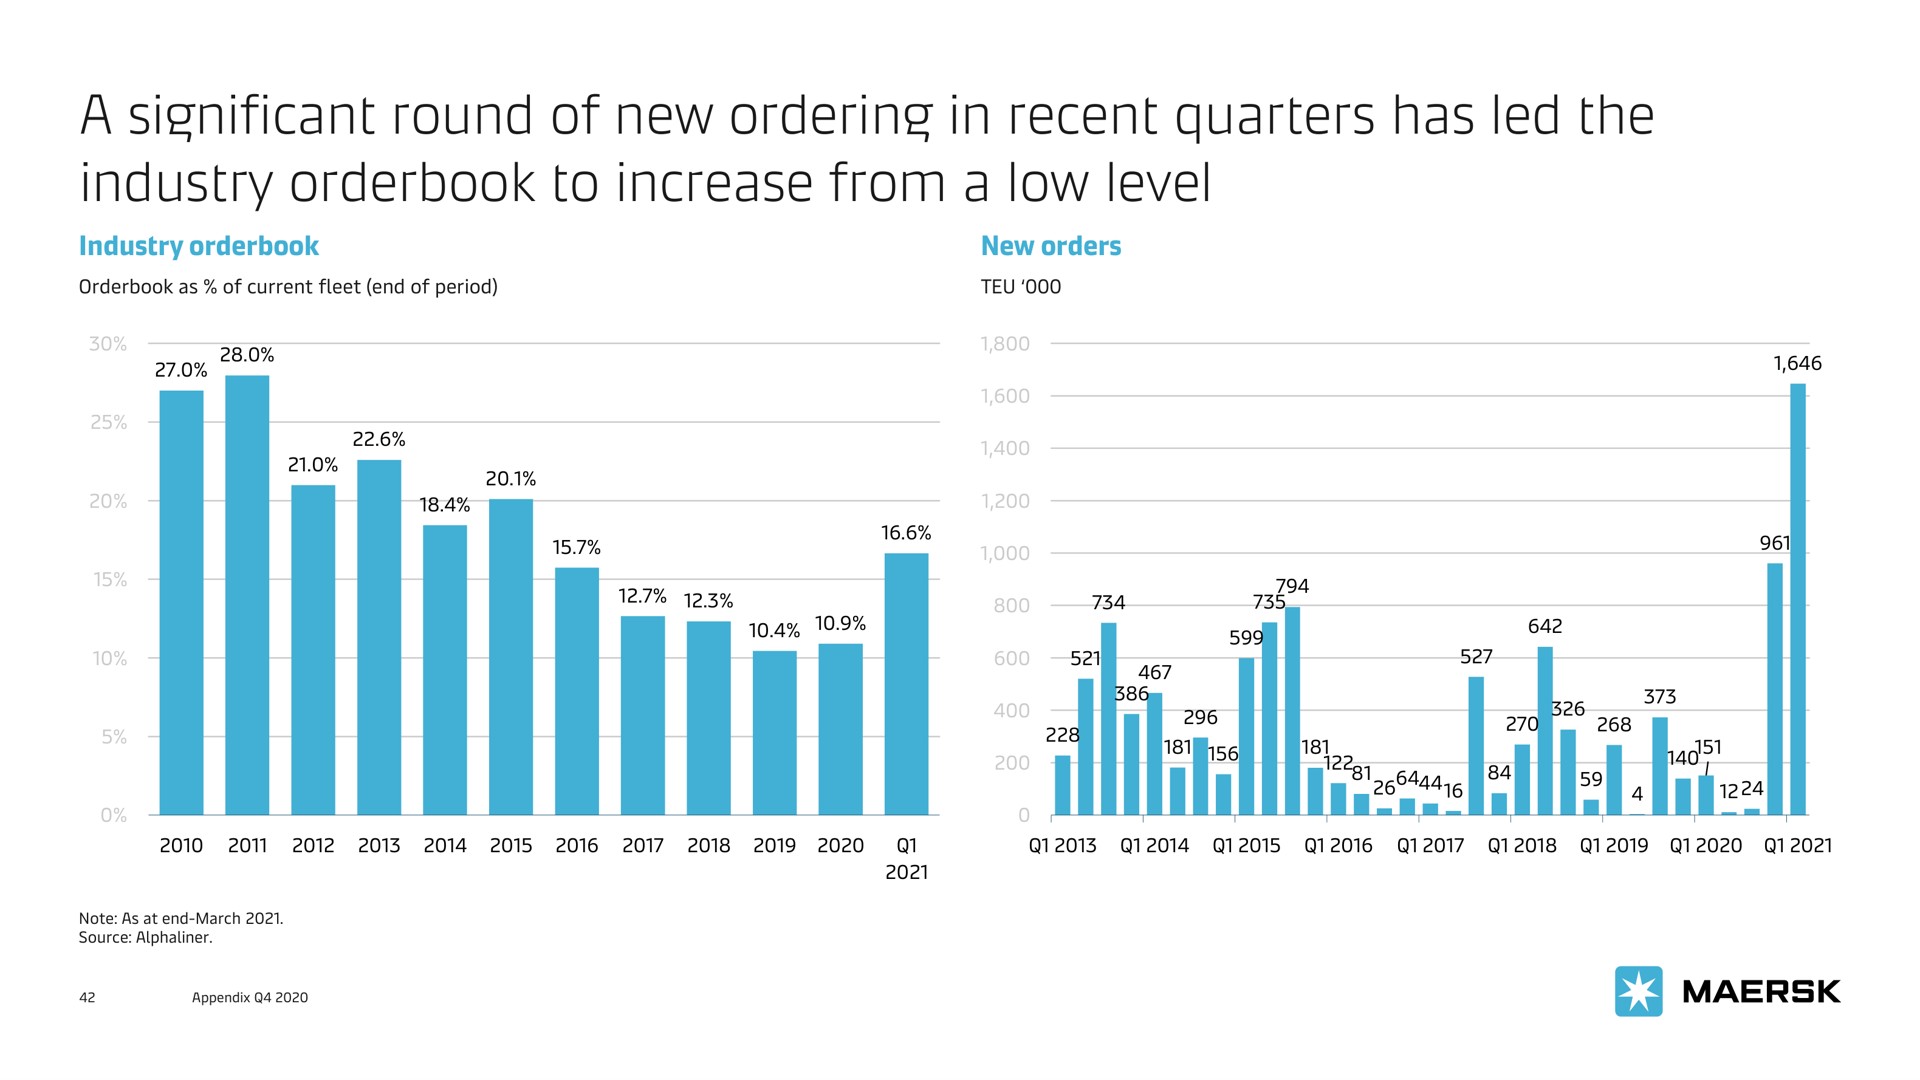 a significant round of new ordering in recent quarters has led the industry to increase from a low level | Maersk